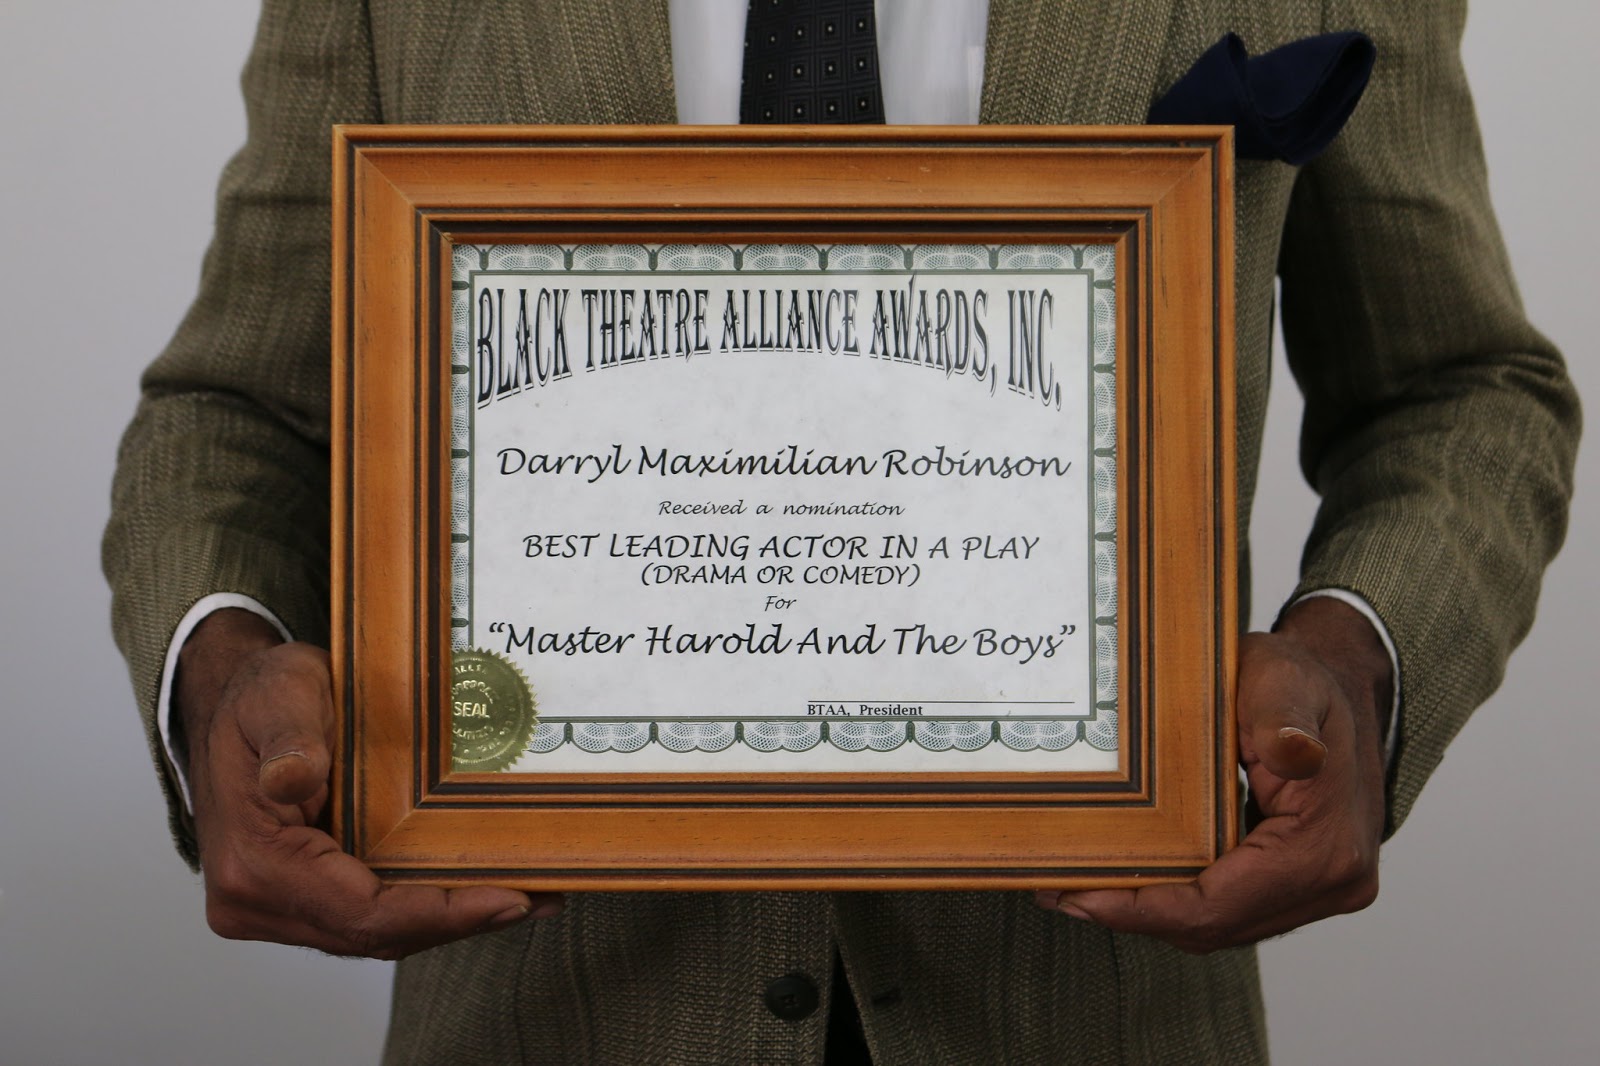 A BTAA Harold Nod: Darryl Maximilian Robinson is winner of a 1997 Chicago Black Theatre Alliance / Ira Aldridge Award nomination for Best Leading Actor In A Play for The ESC staging of Master Harold.